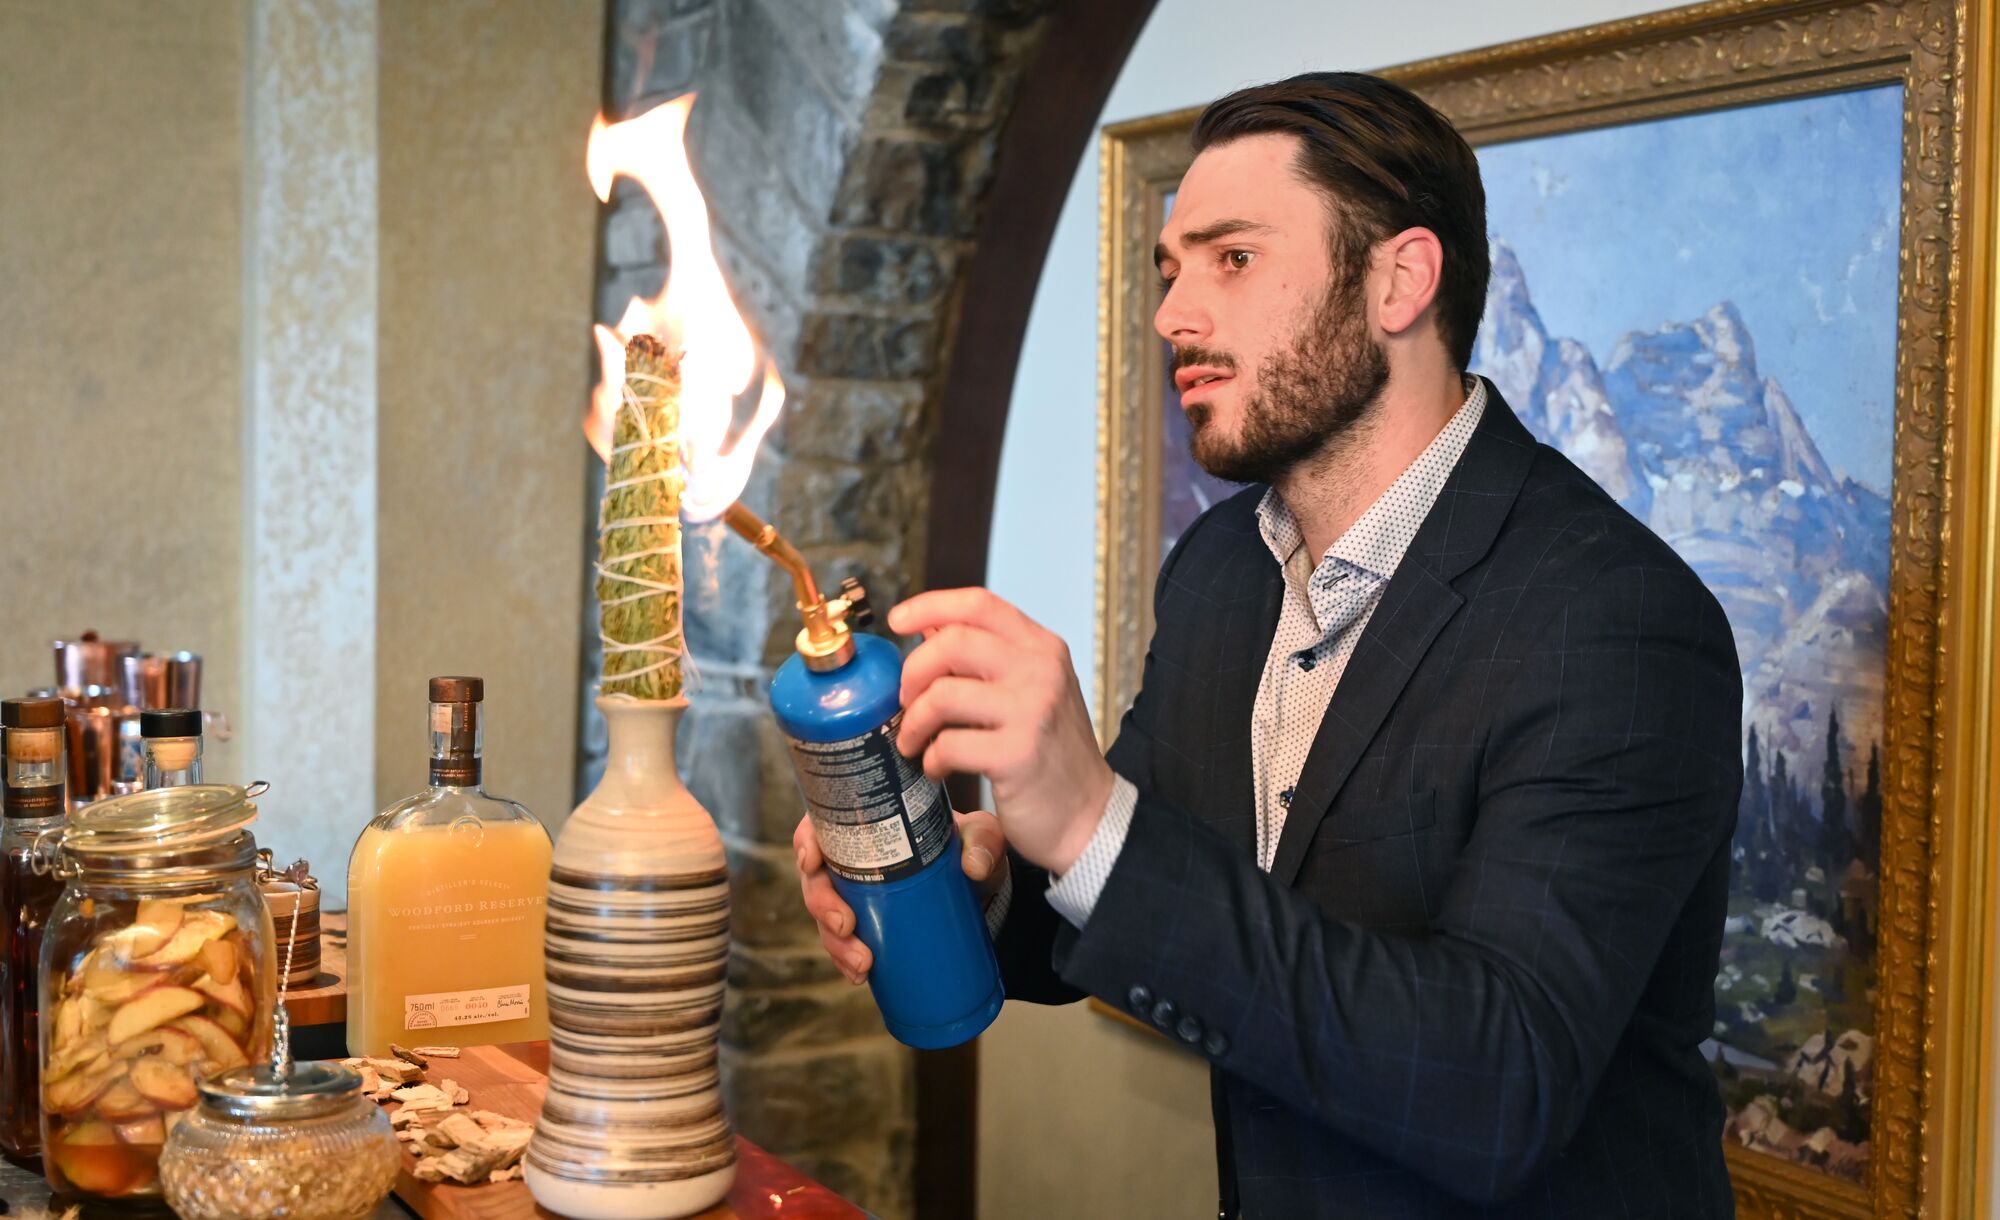 A bartender fires off a torch while making a fancy cocktail at the Banff Food & Cocktail Festival.